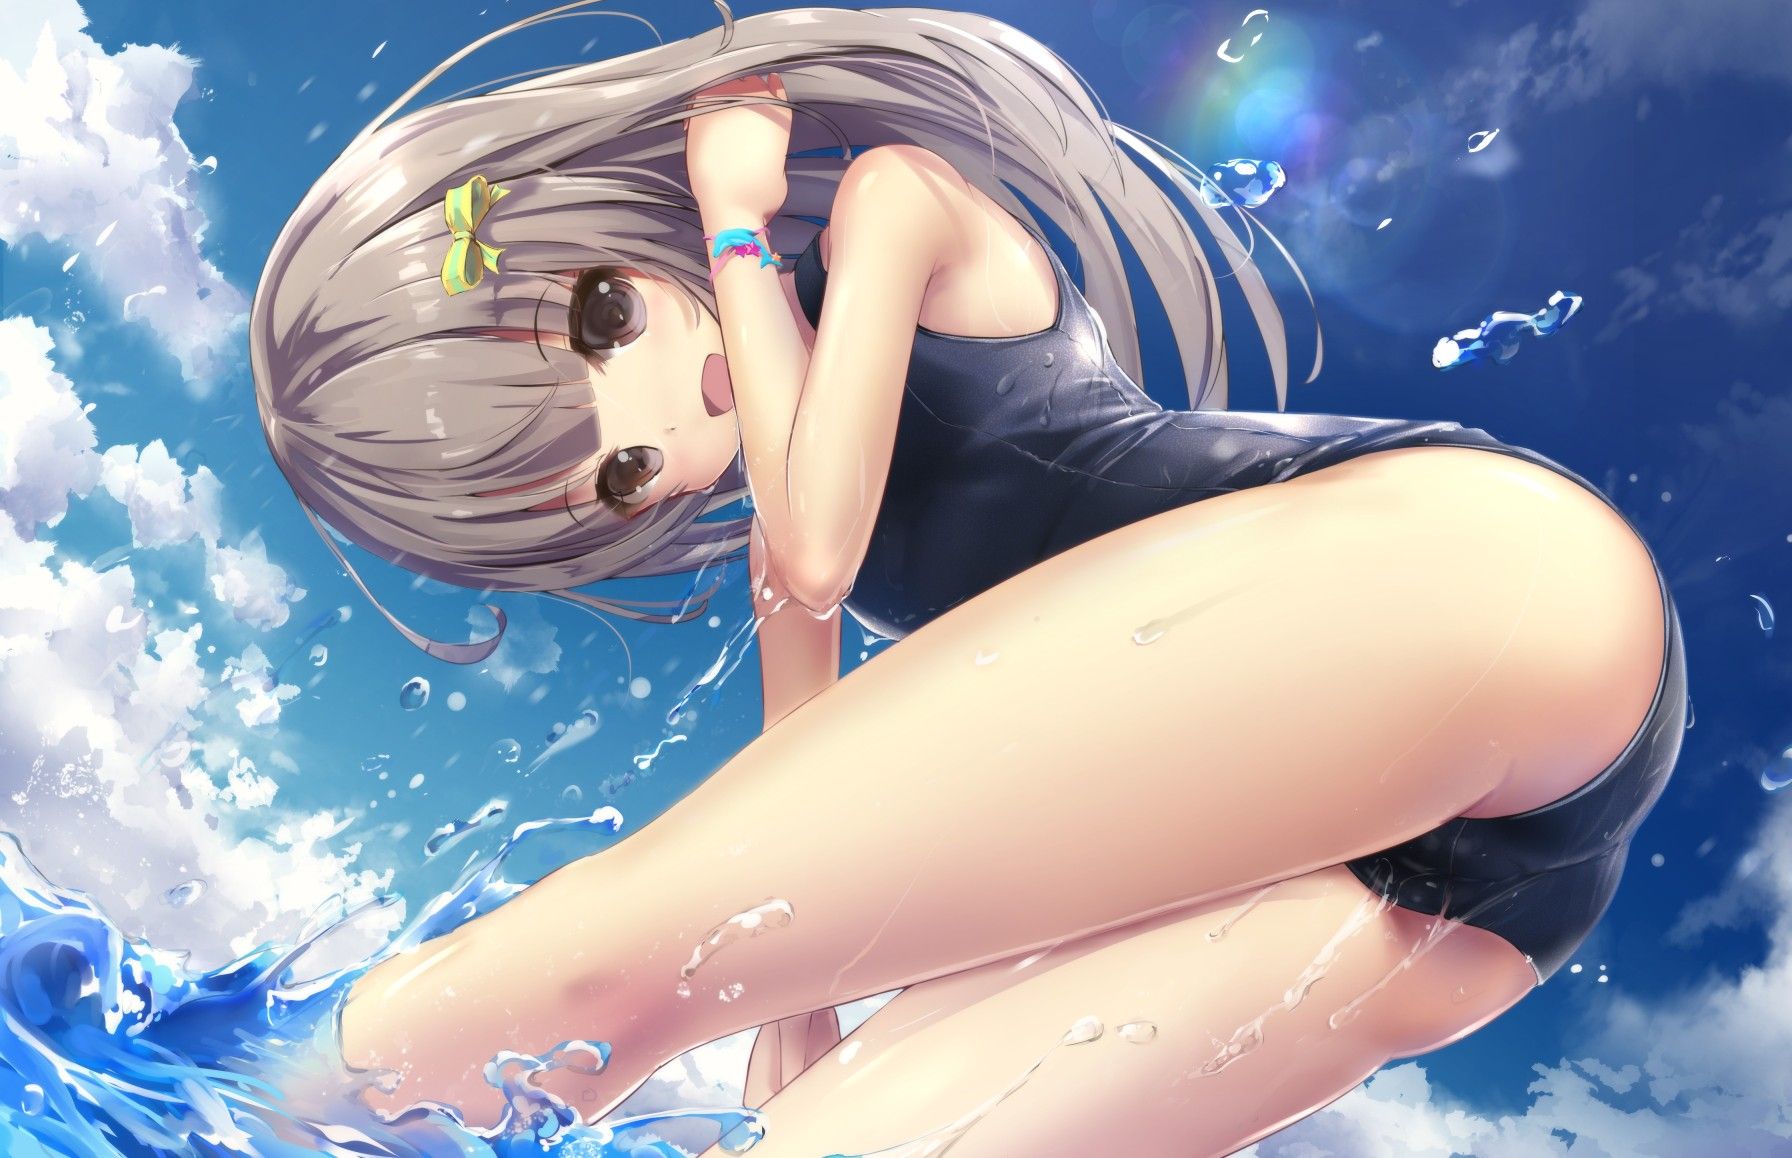 Or was I risk's water, I risk's water good swimsuit's a! 16